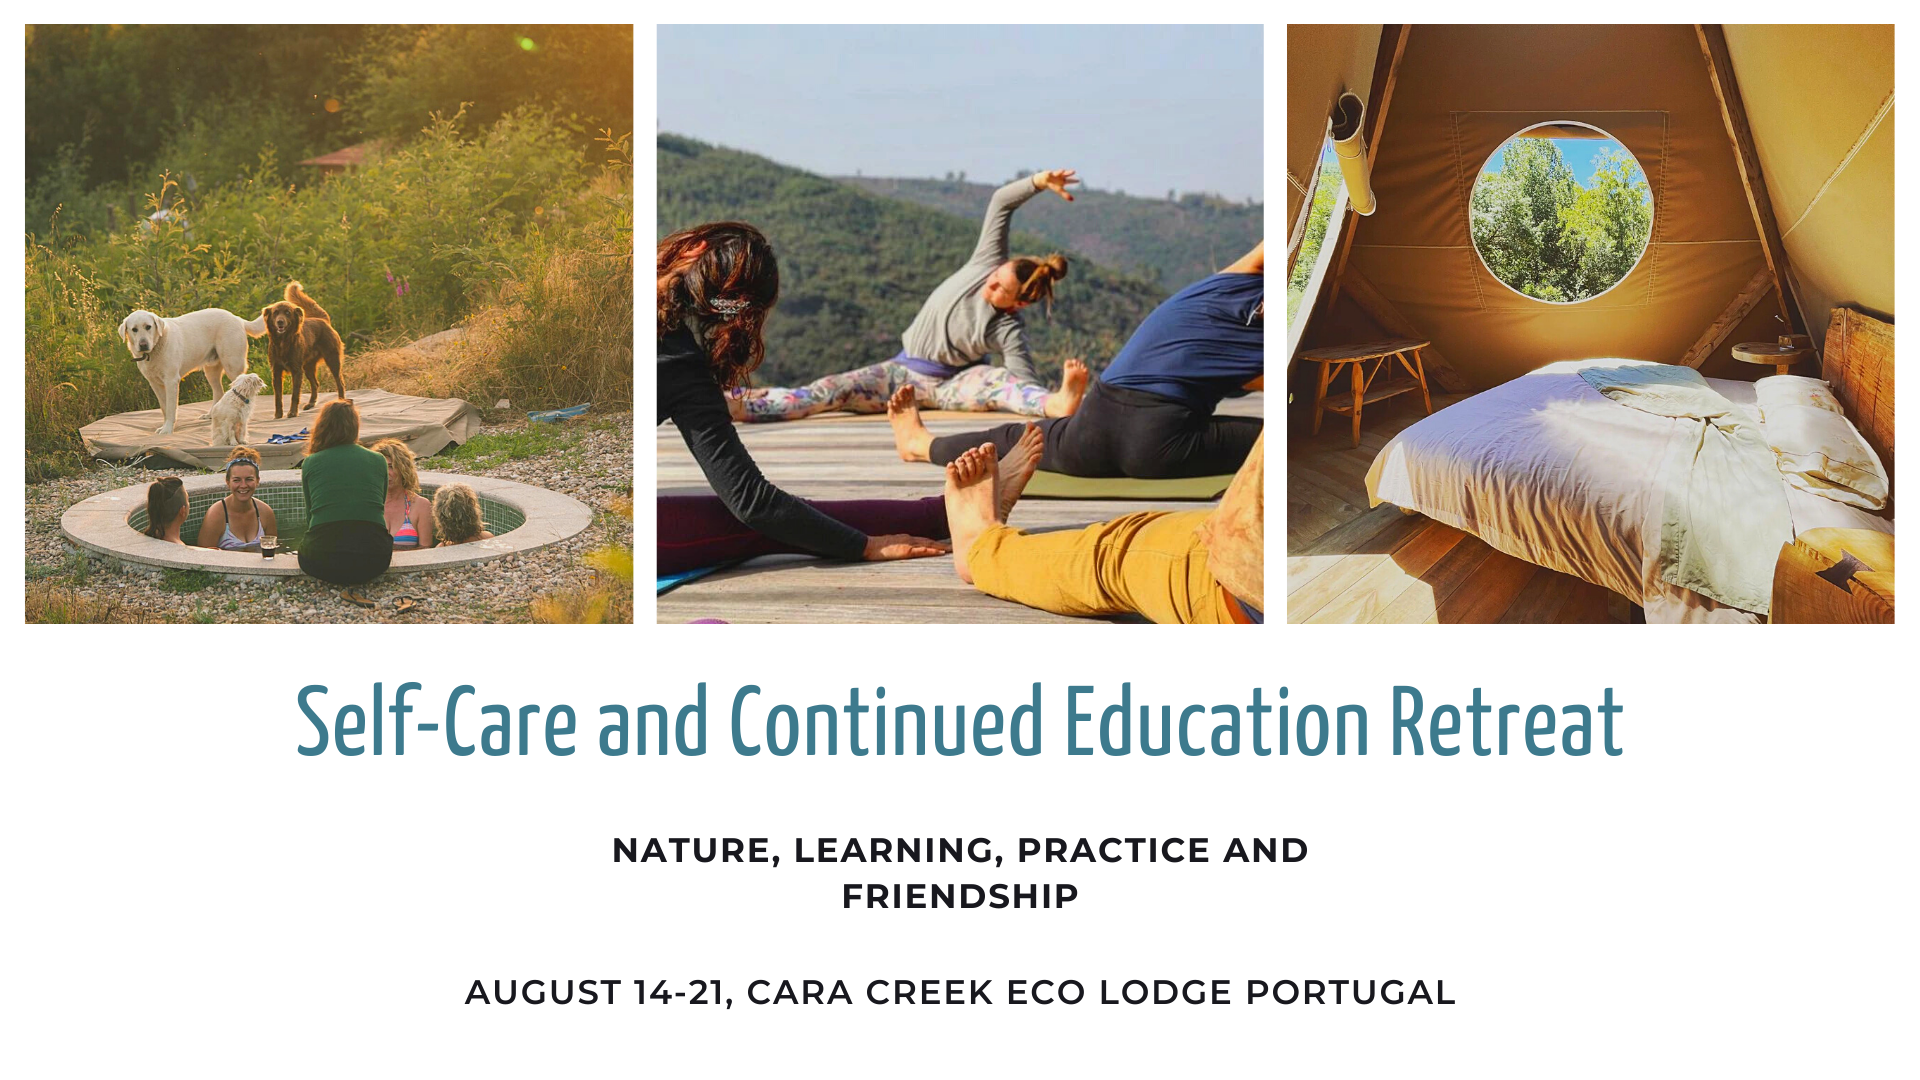 Self-Care and Continued Education Retreat in Nature